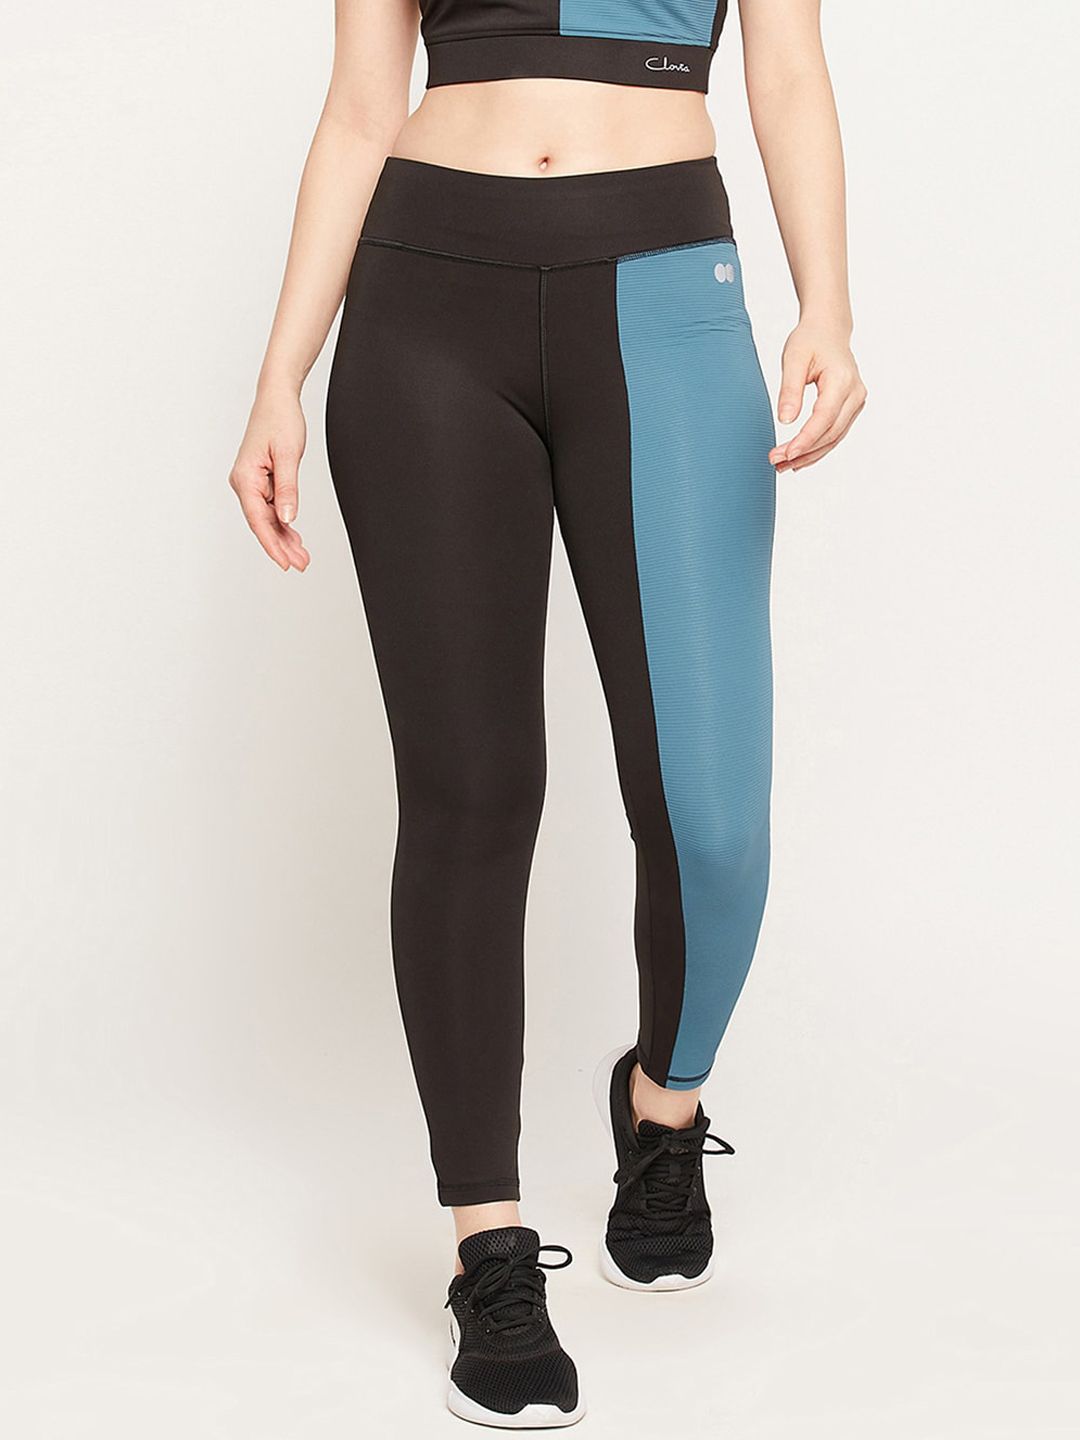 Clovia Women Black & Teal-Blue Color-Blocked Snug-Fit Ankle-Length Tights Price in India